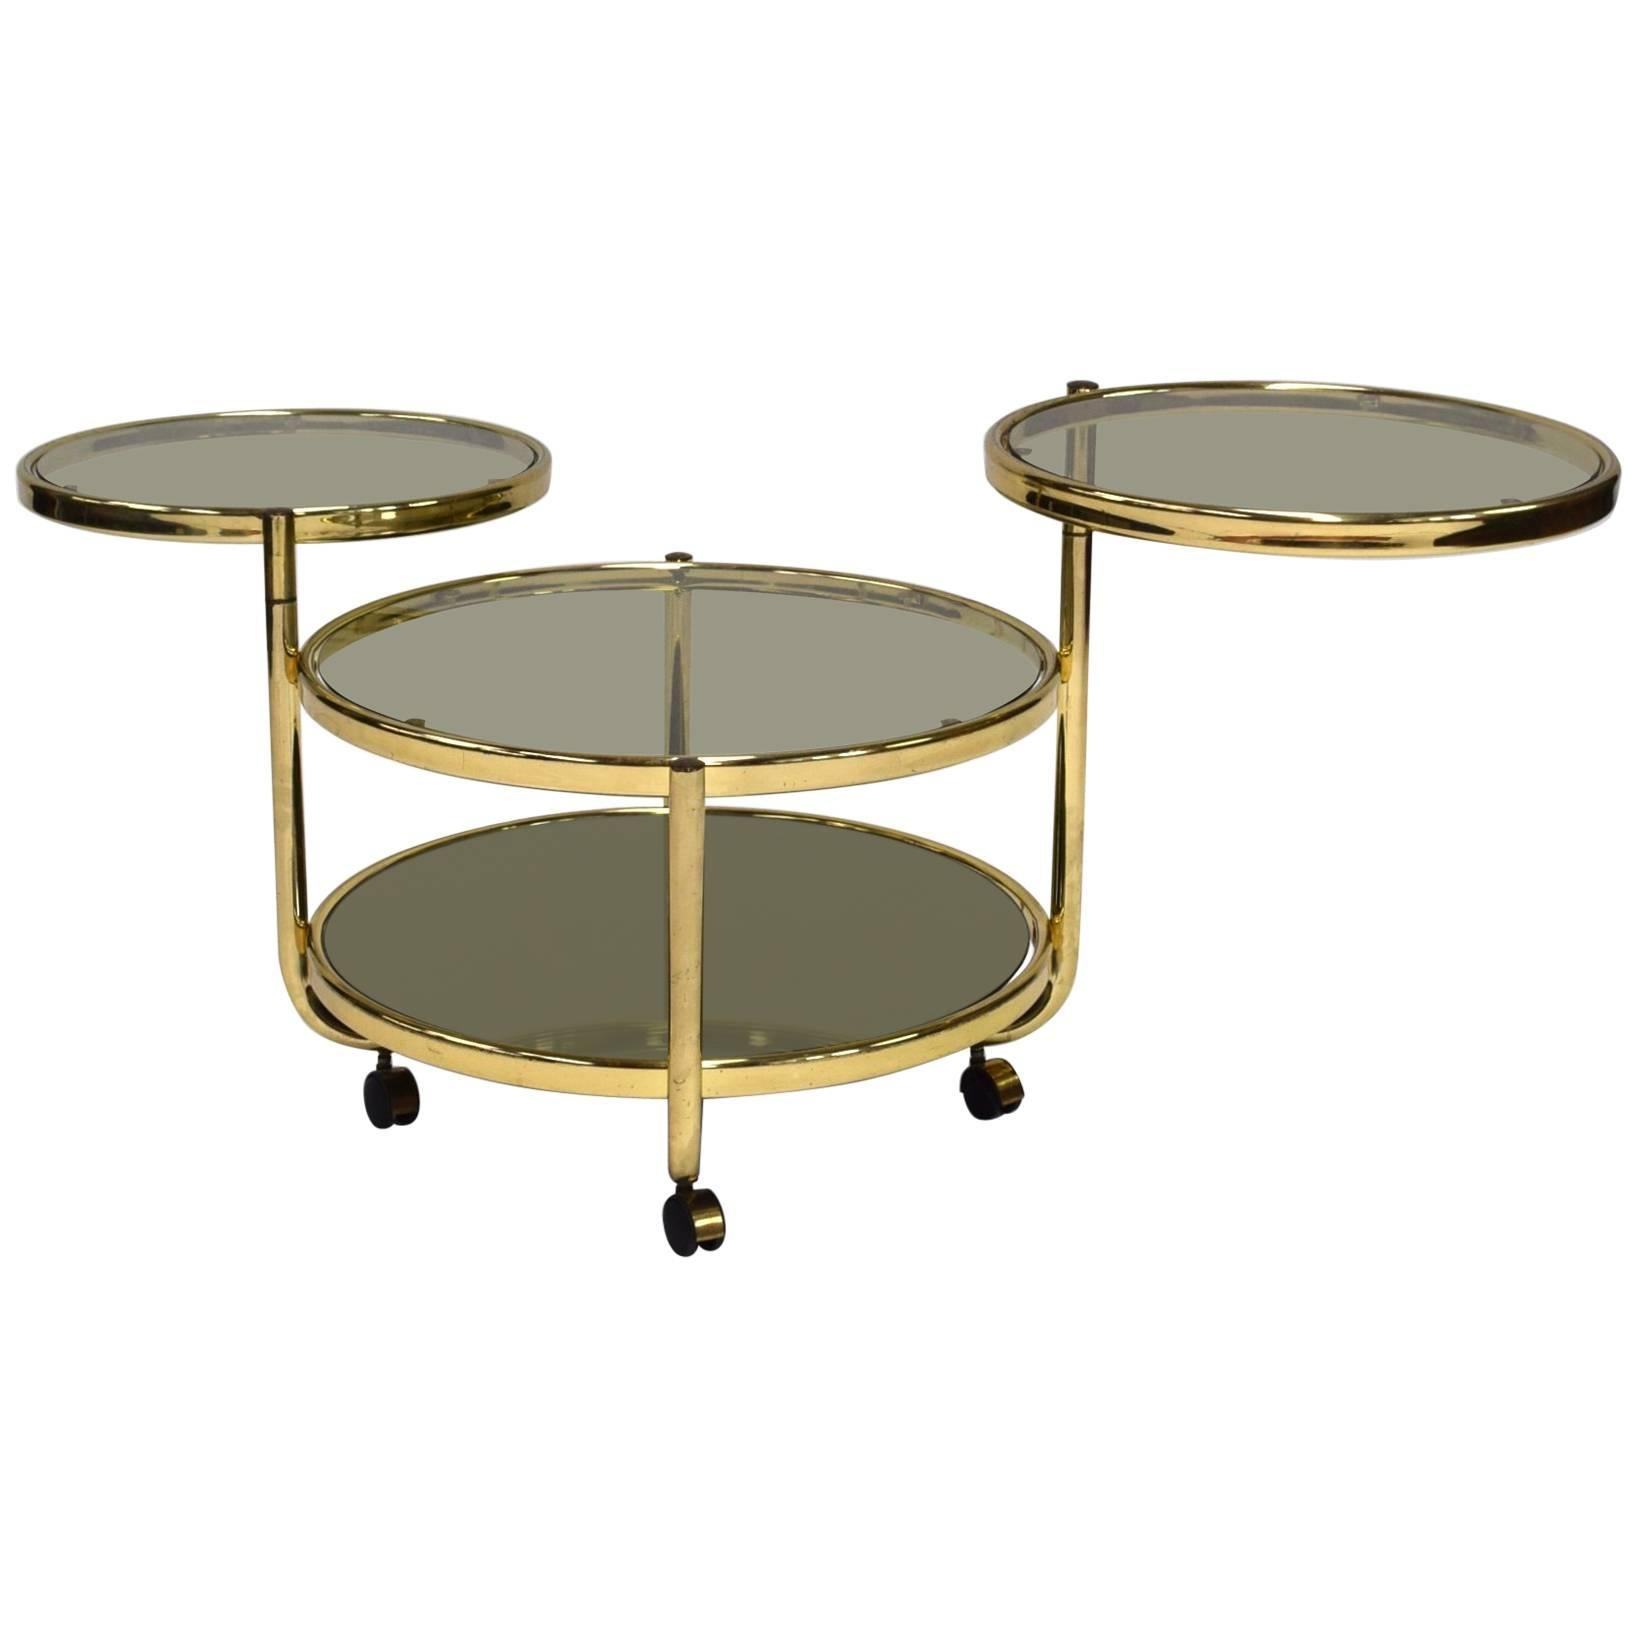 Italian Round Brass and Glass Cocktail Bar Cart in Hollywood Regency Style